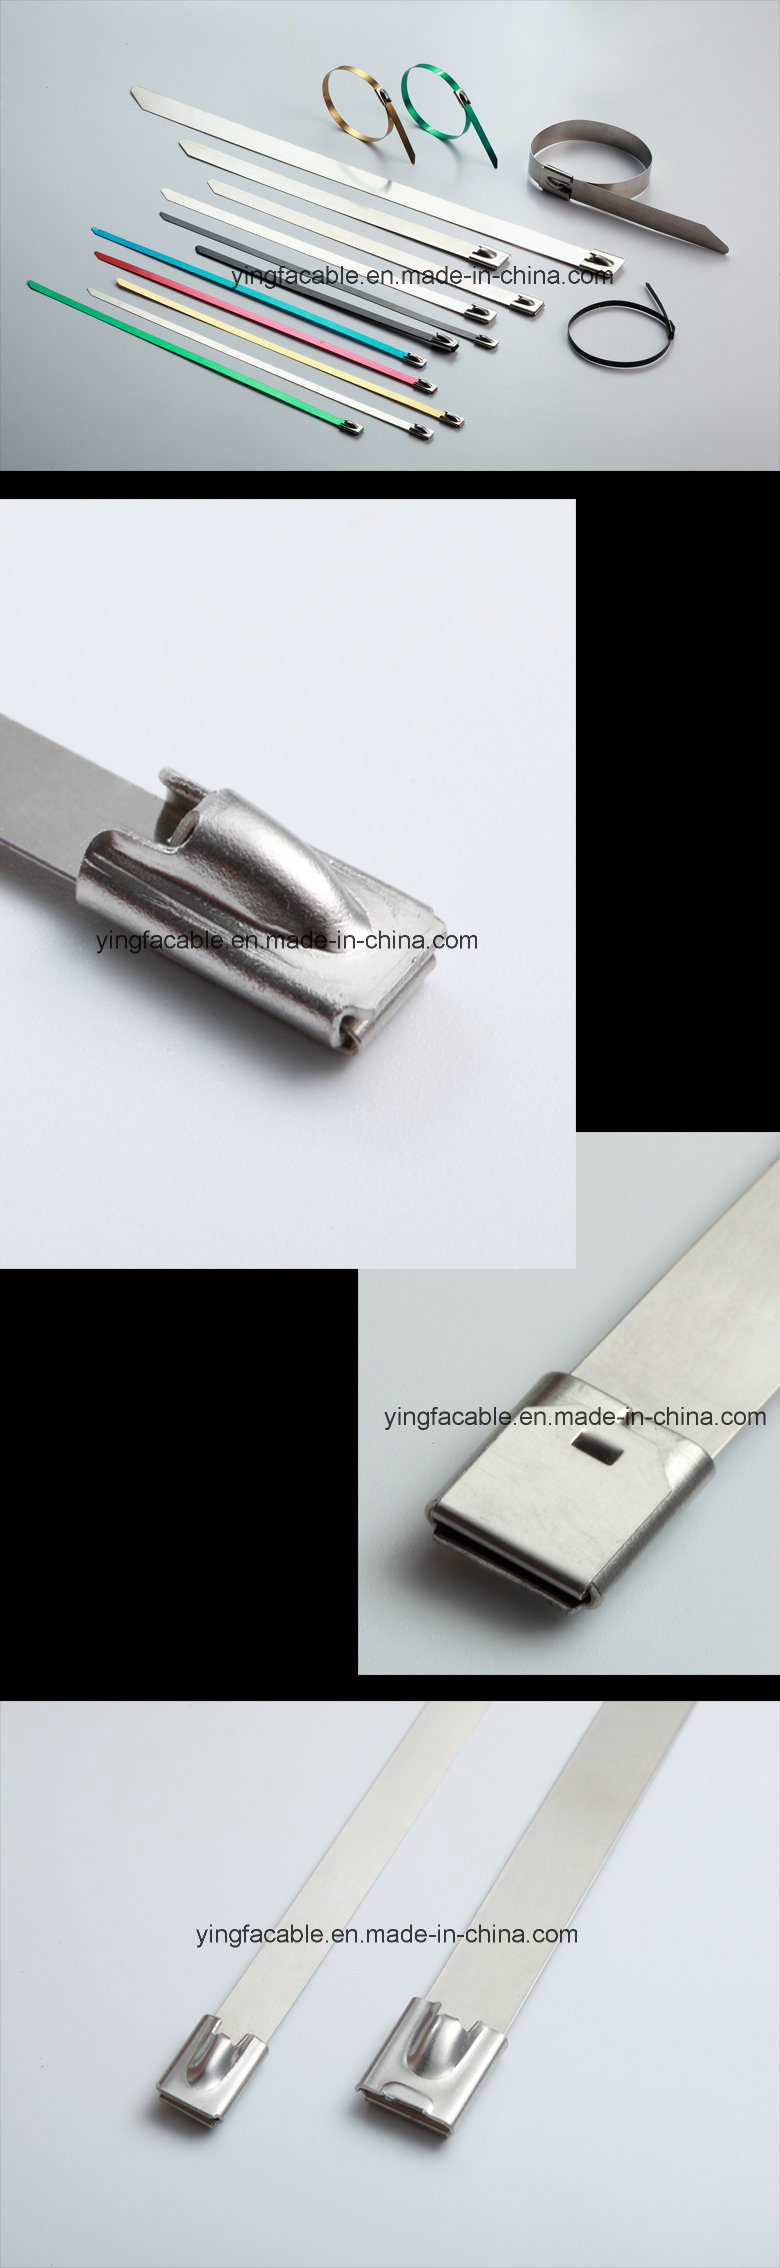 High Quality Quick Deliver Date 304 316 Grade Stainless Steel Locking Ball Ss Zip Ties for Outdoor